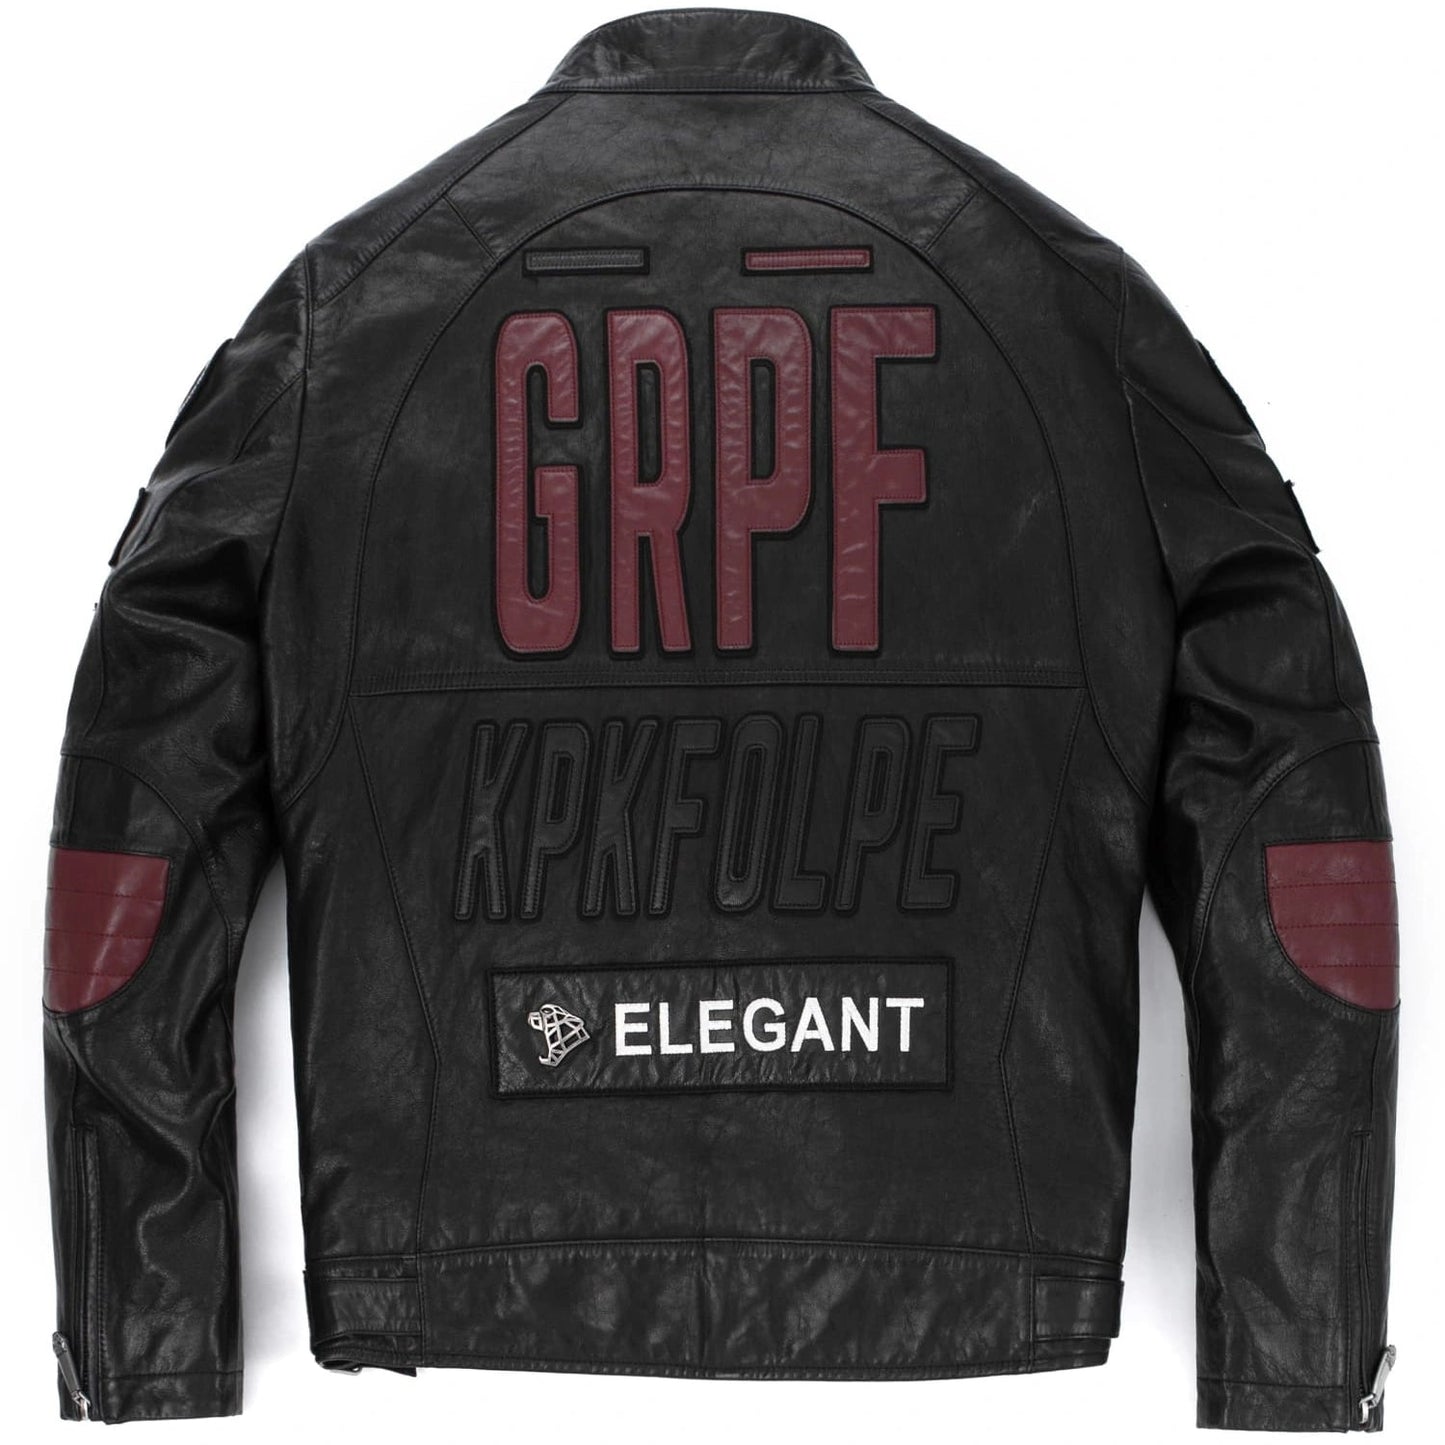 Buy Best Black Full Patched Genuine Leather Racer Jacket